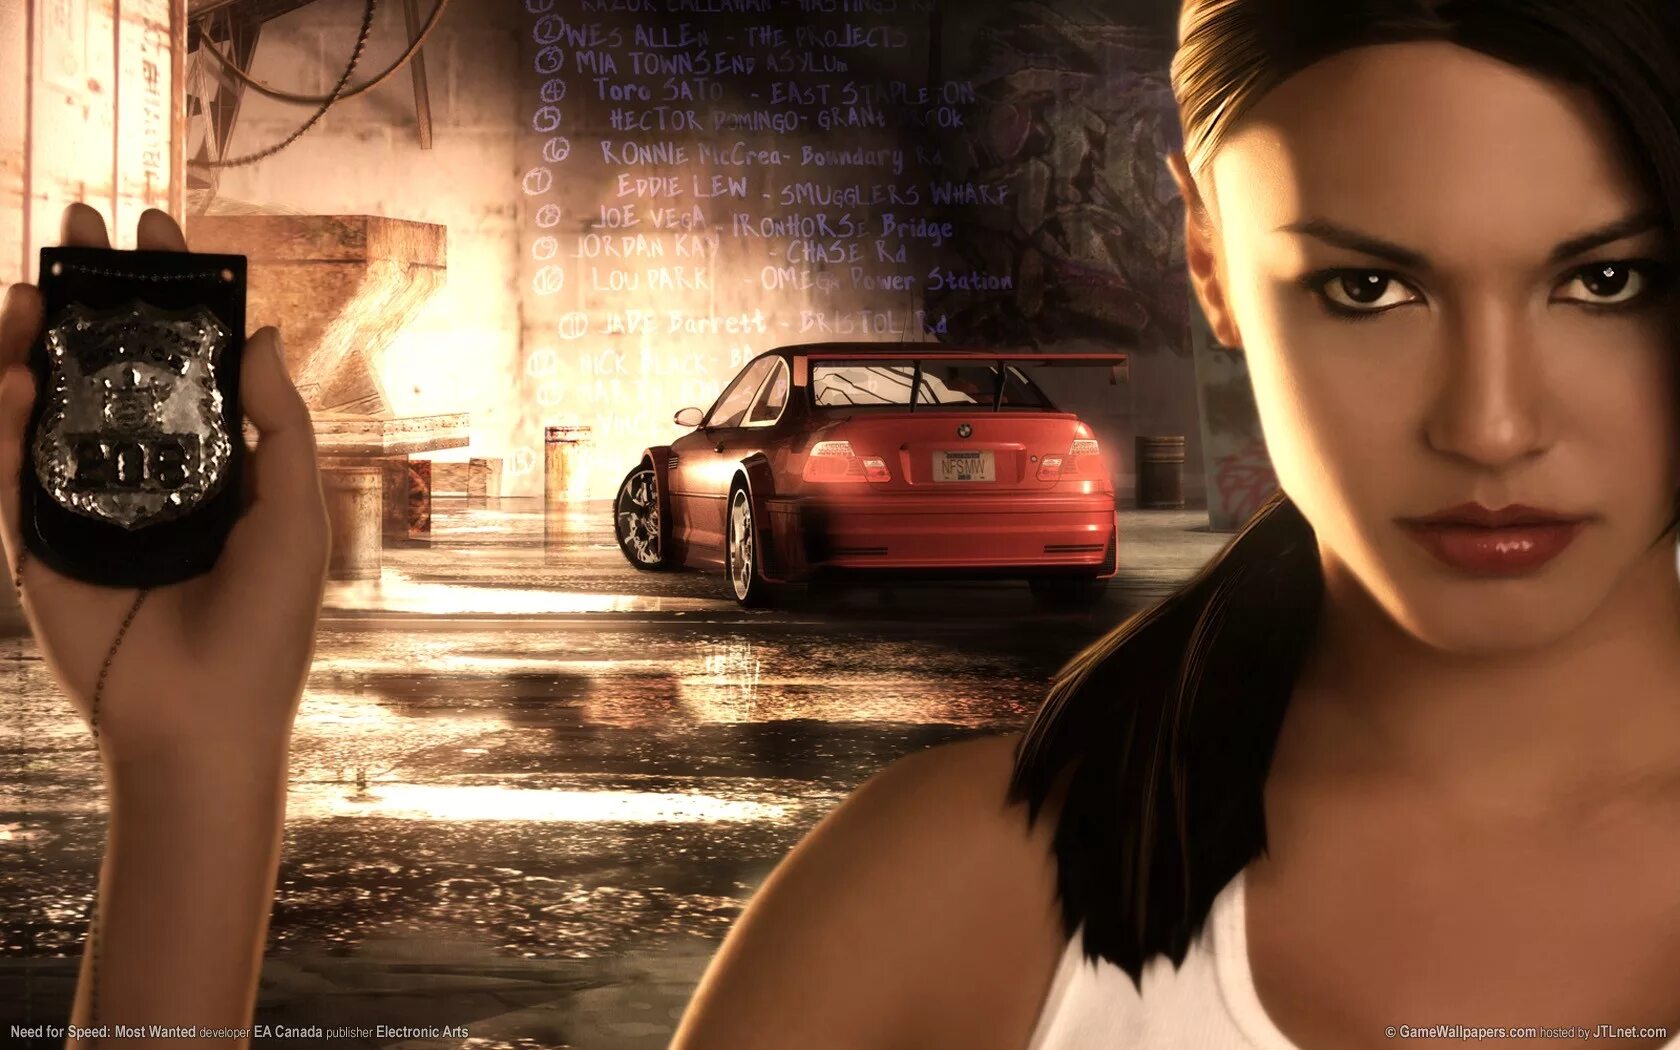 Need download. Миа Таунсенд need for Speed. Need for Speed most wanted 2005 Миа. Ванесса Маршалл need for Speed most wanted. NFS MW 2005 Миа.